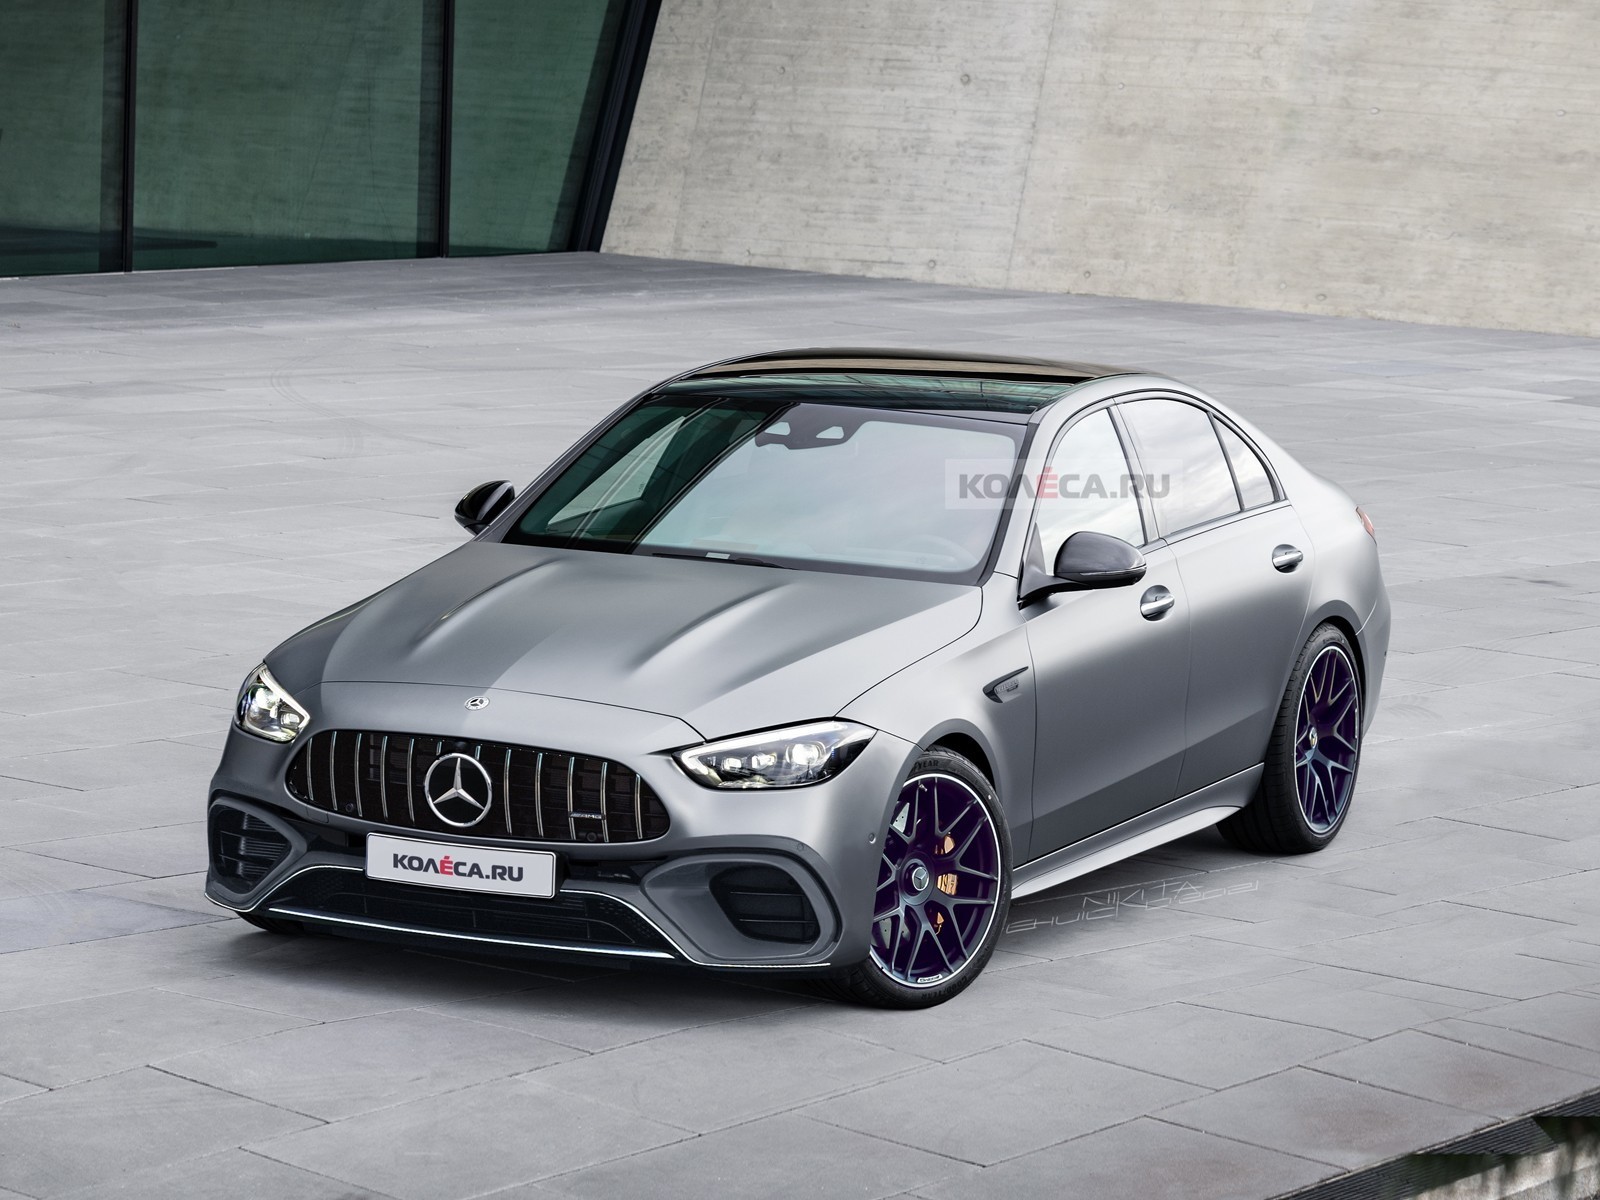 2023 MercedesAMG C 63 Imagined; Your FourPot BMW M3 Rival Is Almost